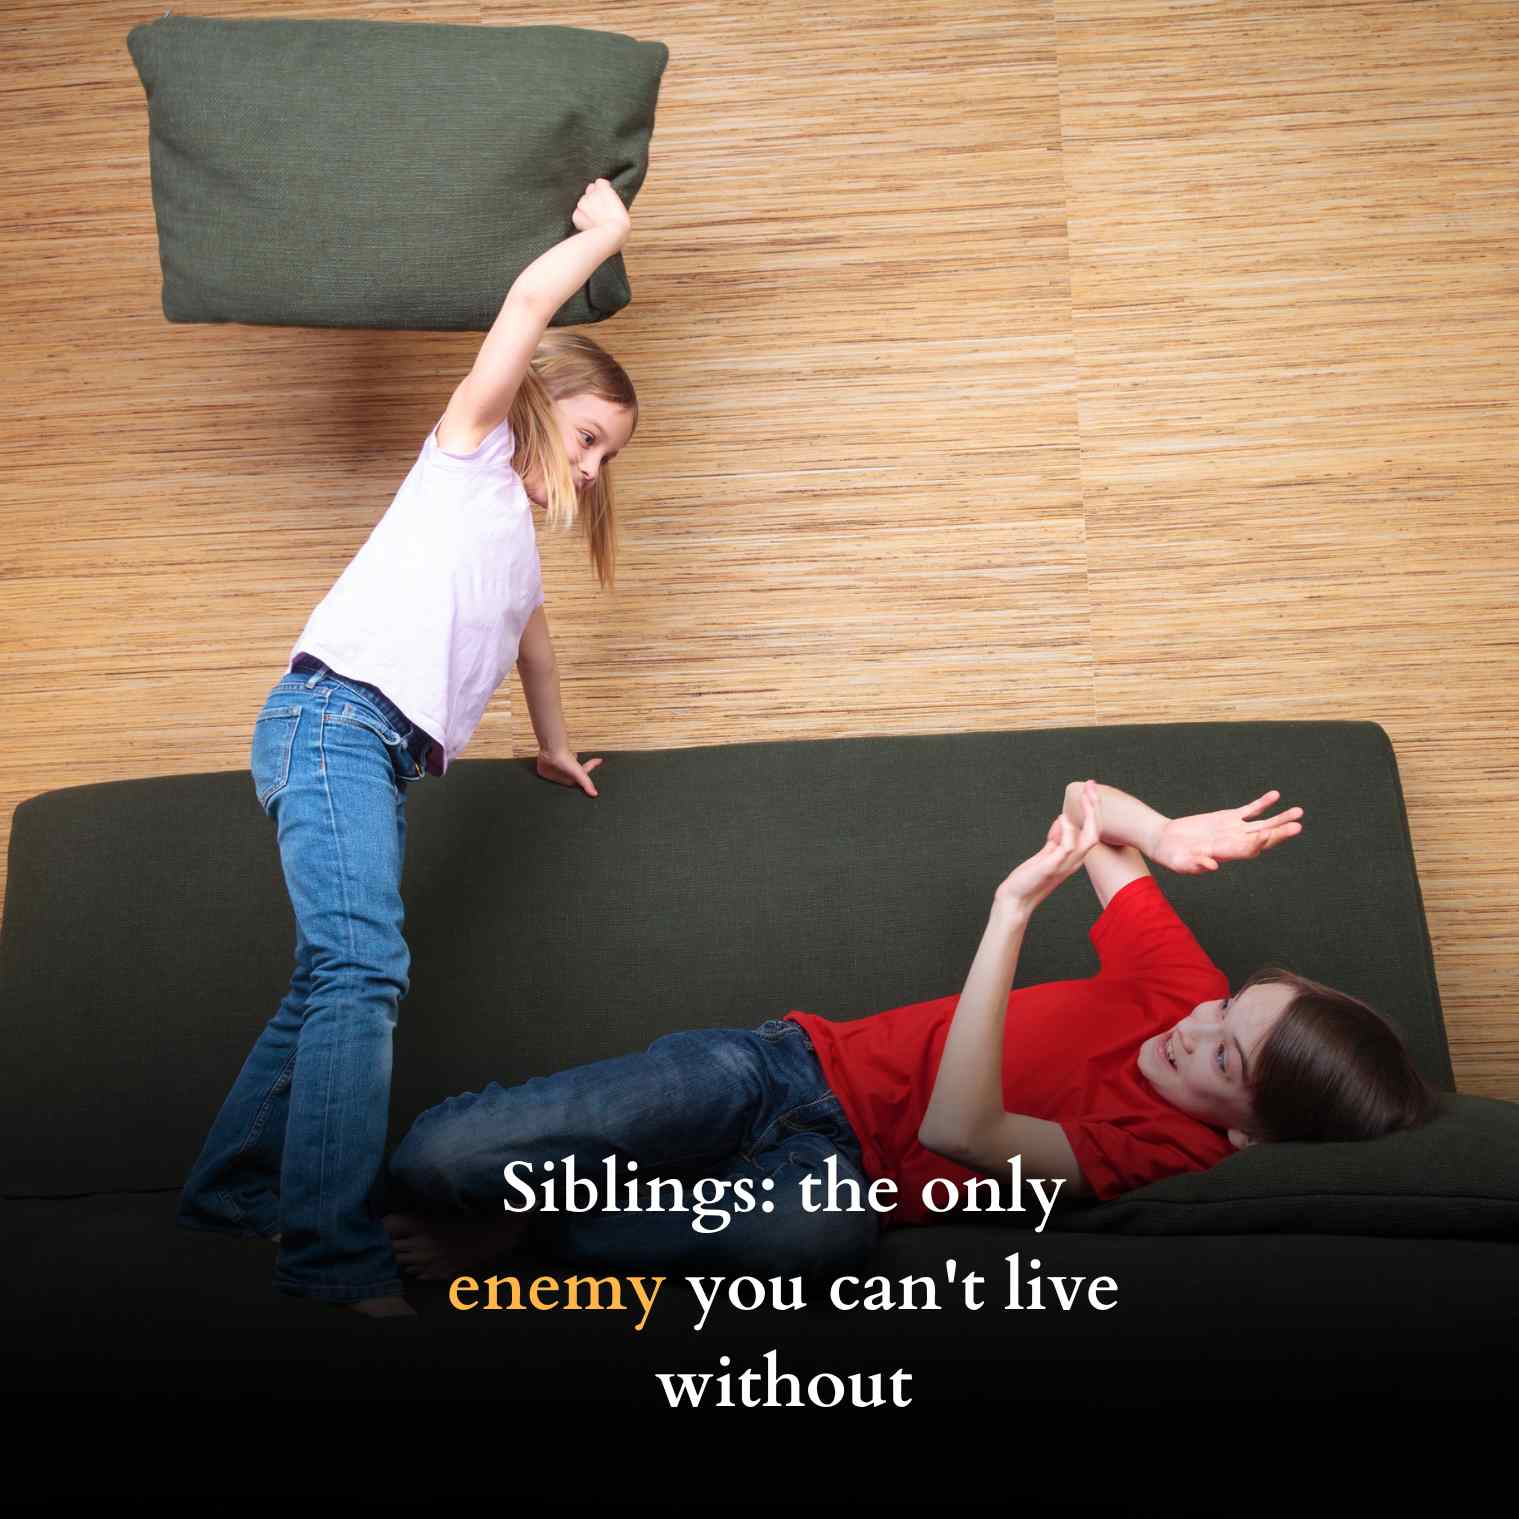 brother and sister quotes